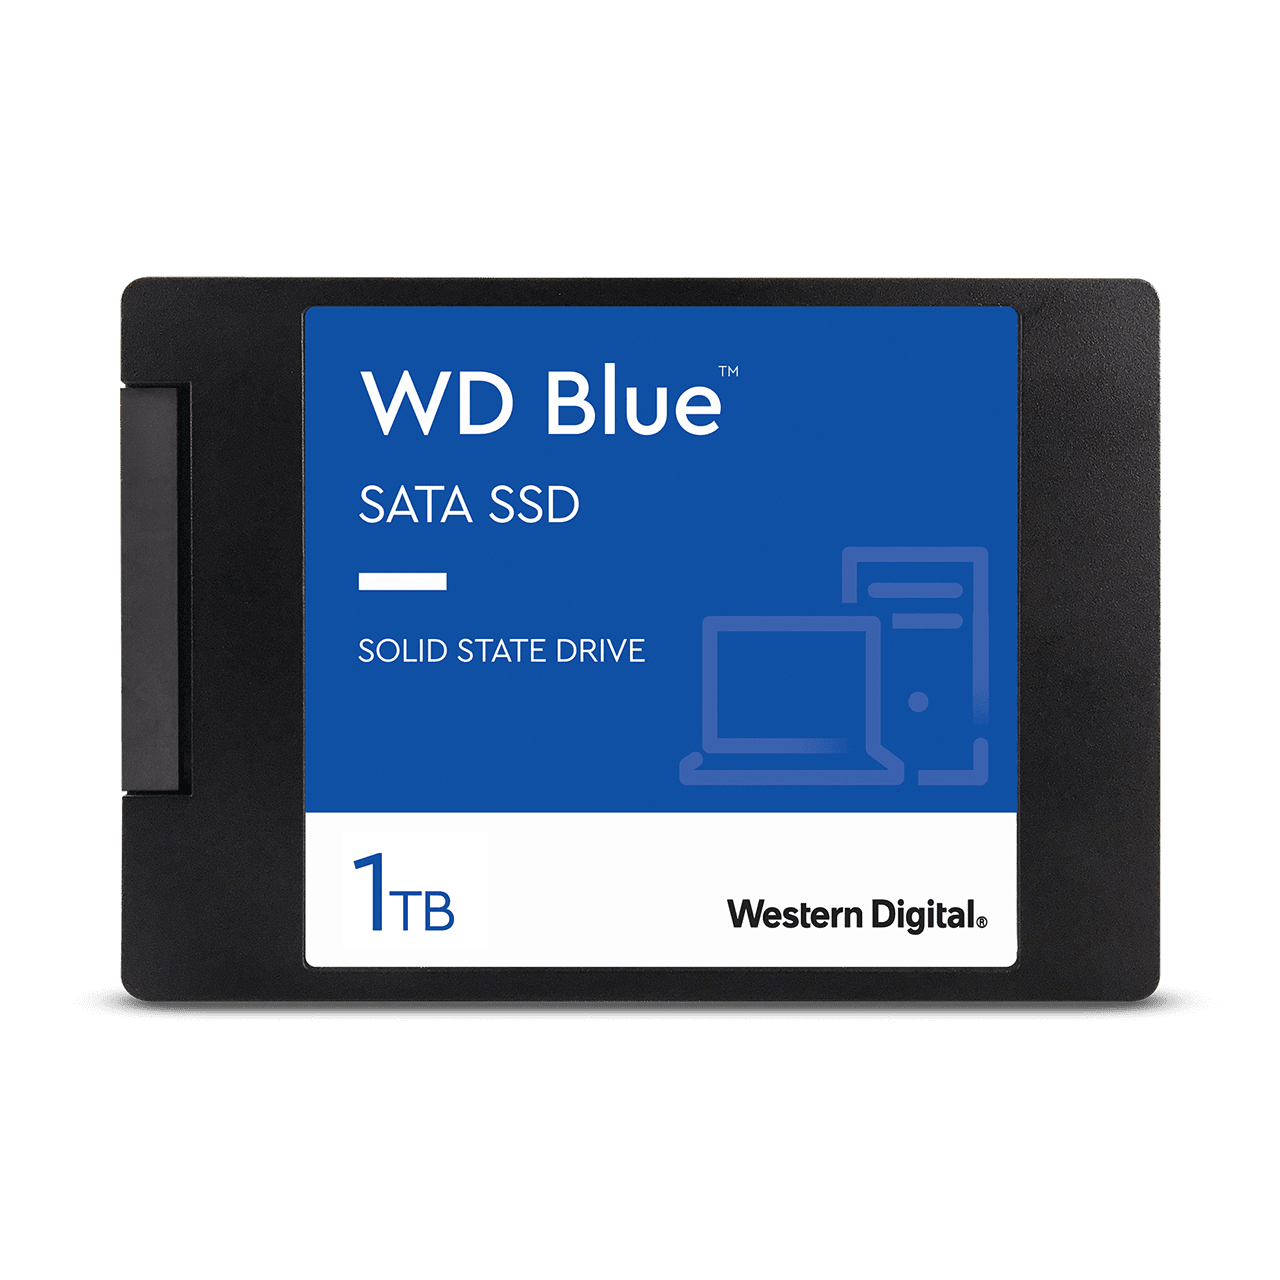 Ổ Cứng Gắn Trong SSD WD Blue 3D-NAND 2.5-Inch SATA III 1TB - WDS100T2B0A